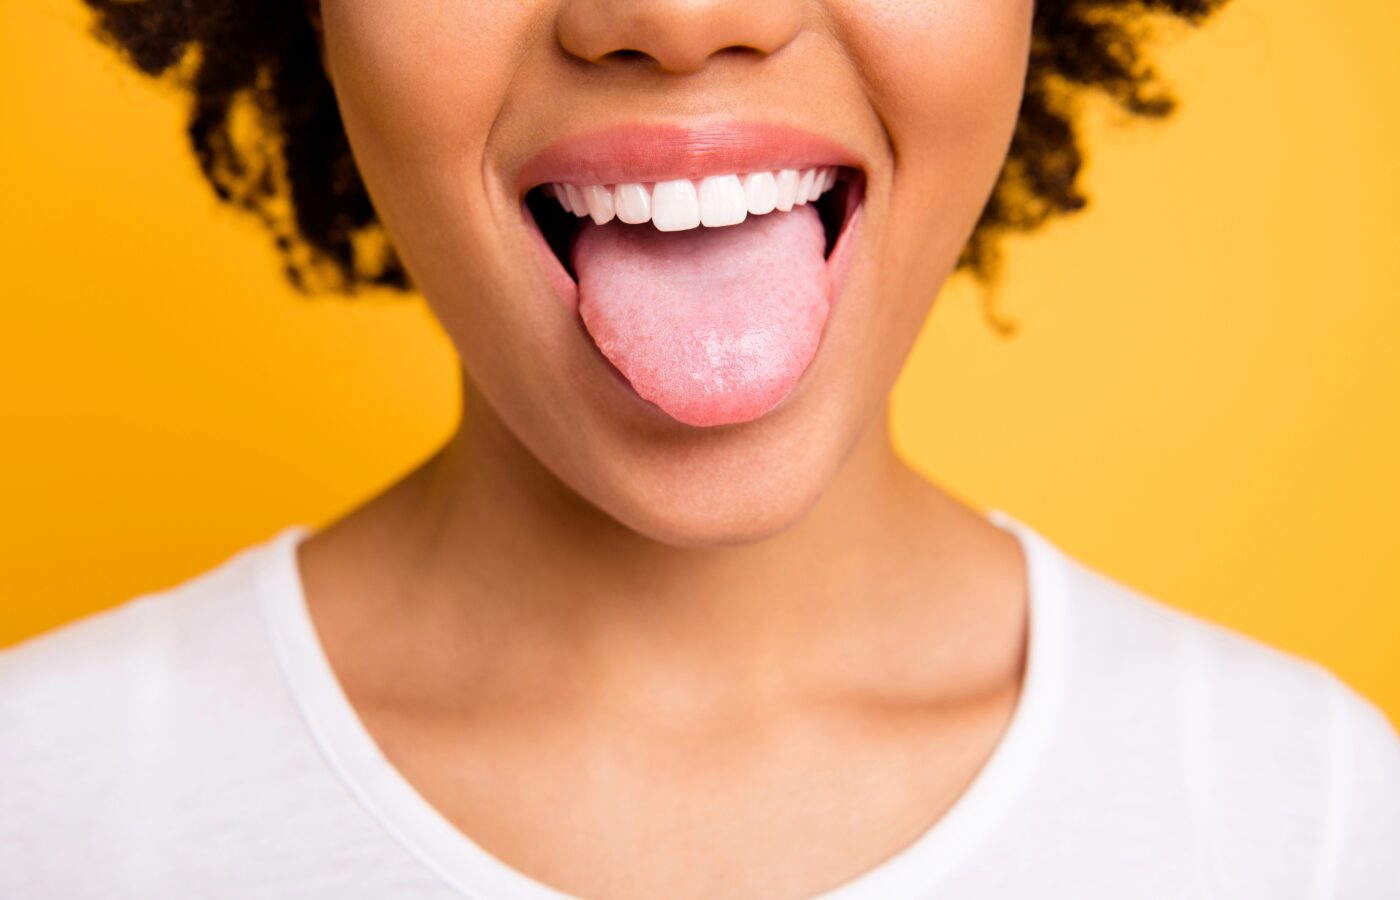 black woman with mouth open and tongue out on a yellow background with a white shirt